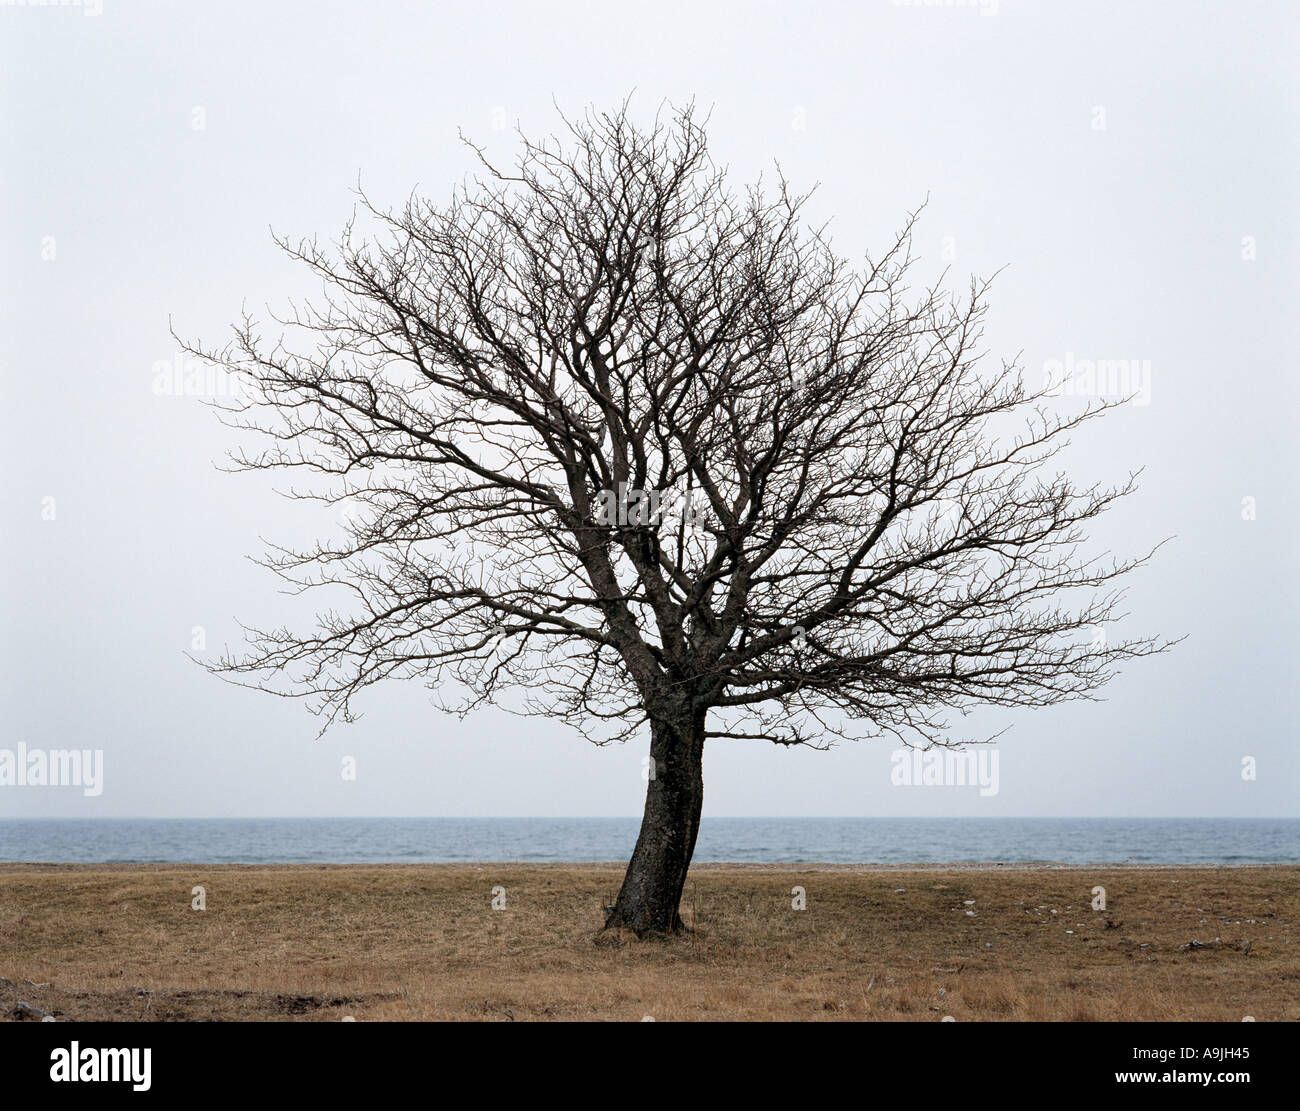 Tree Without Leaves High Resolution Stock Photography and Images - Alamy